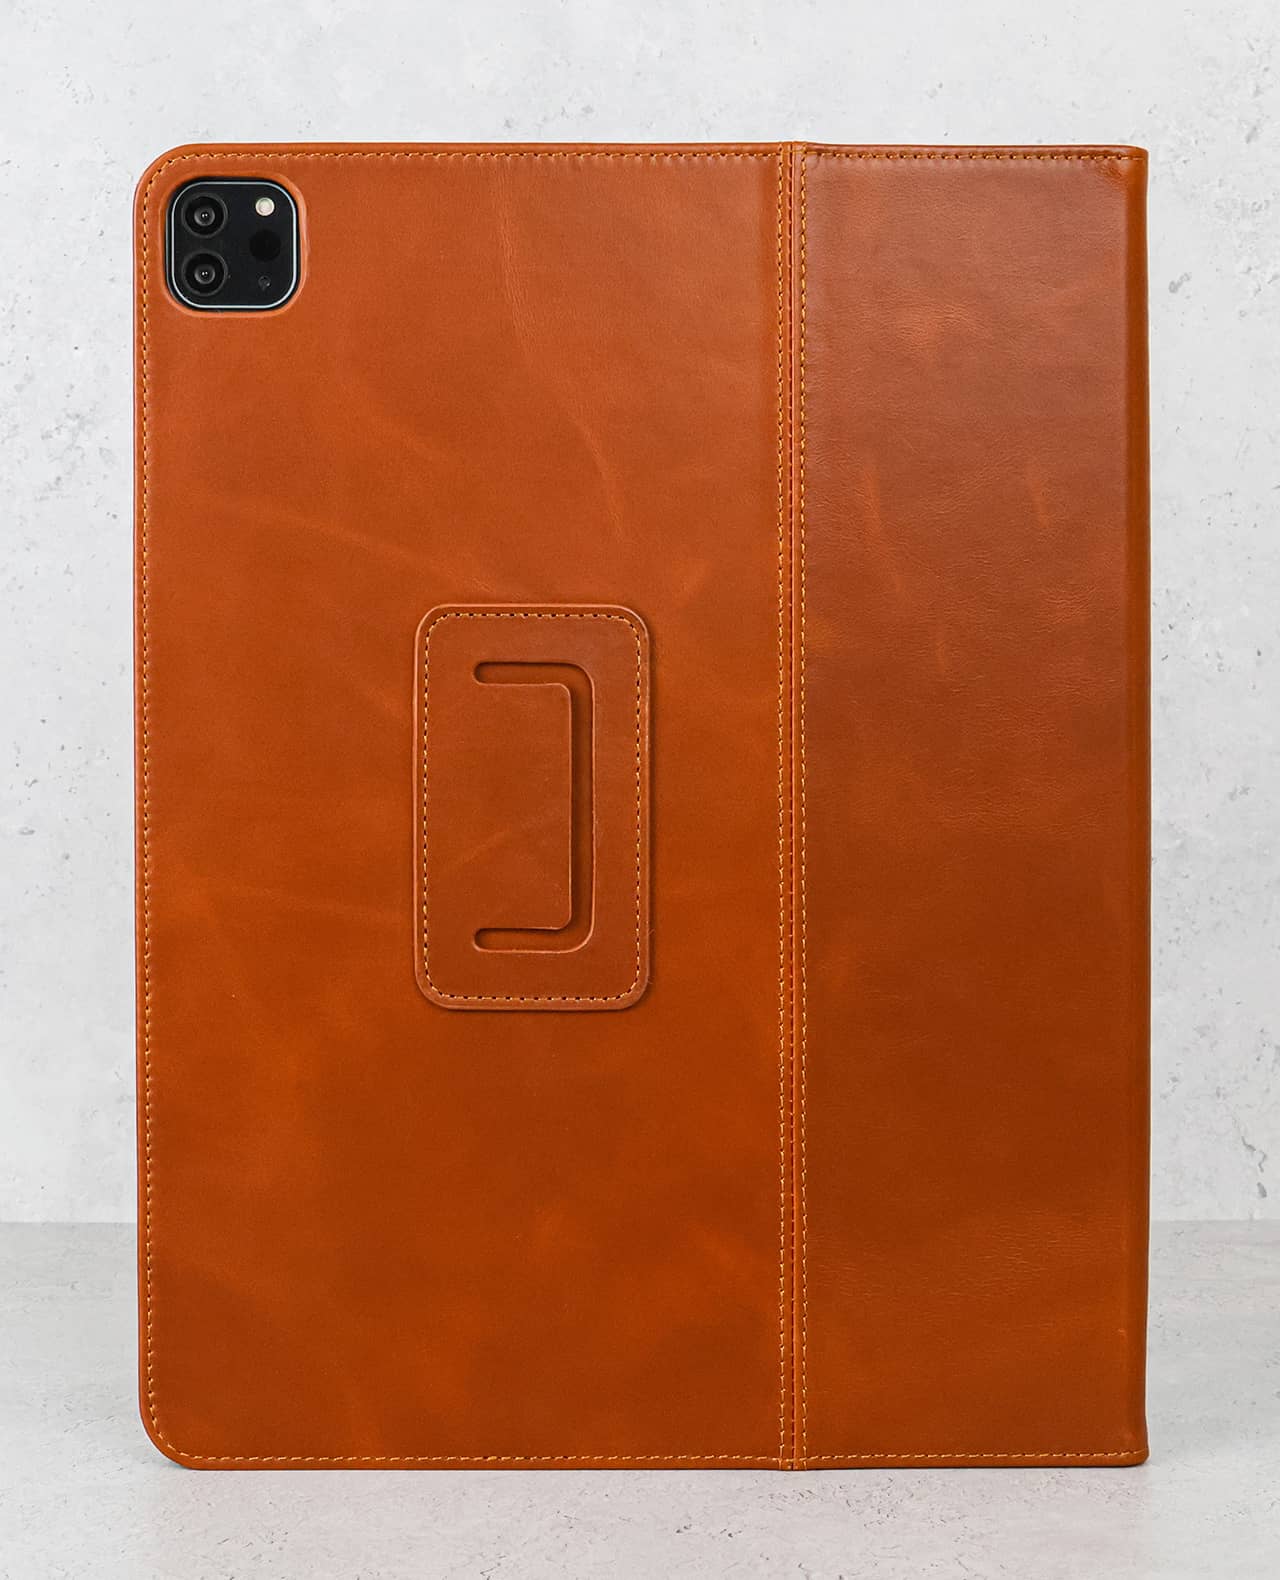 Best Selling iPad 12.9 Case USA Pro - Casemade Leather